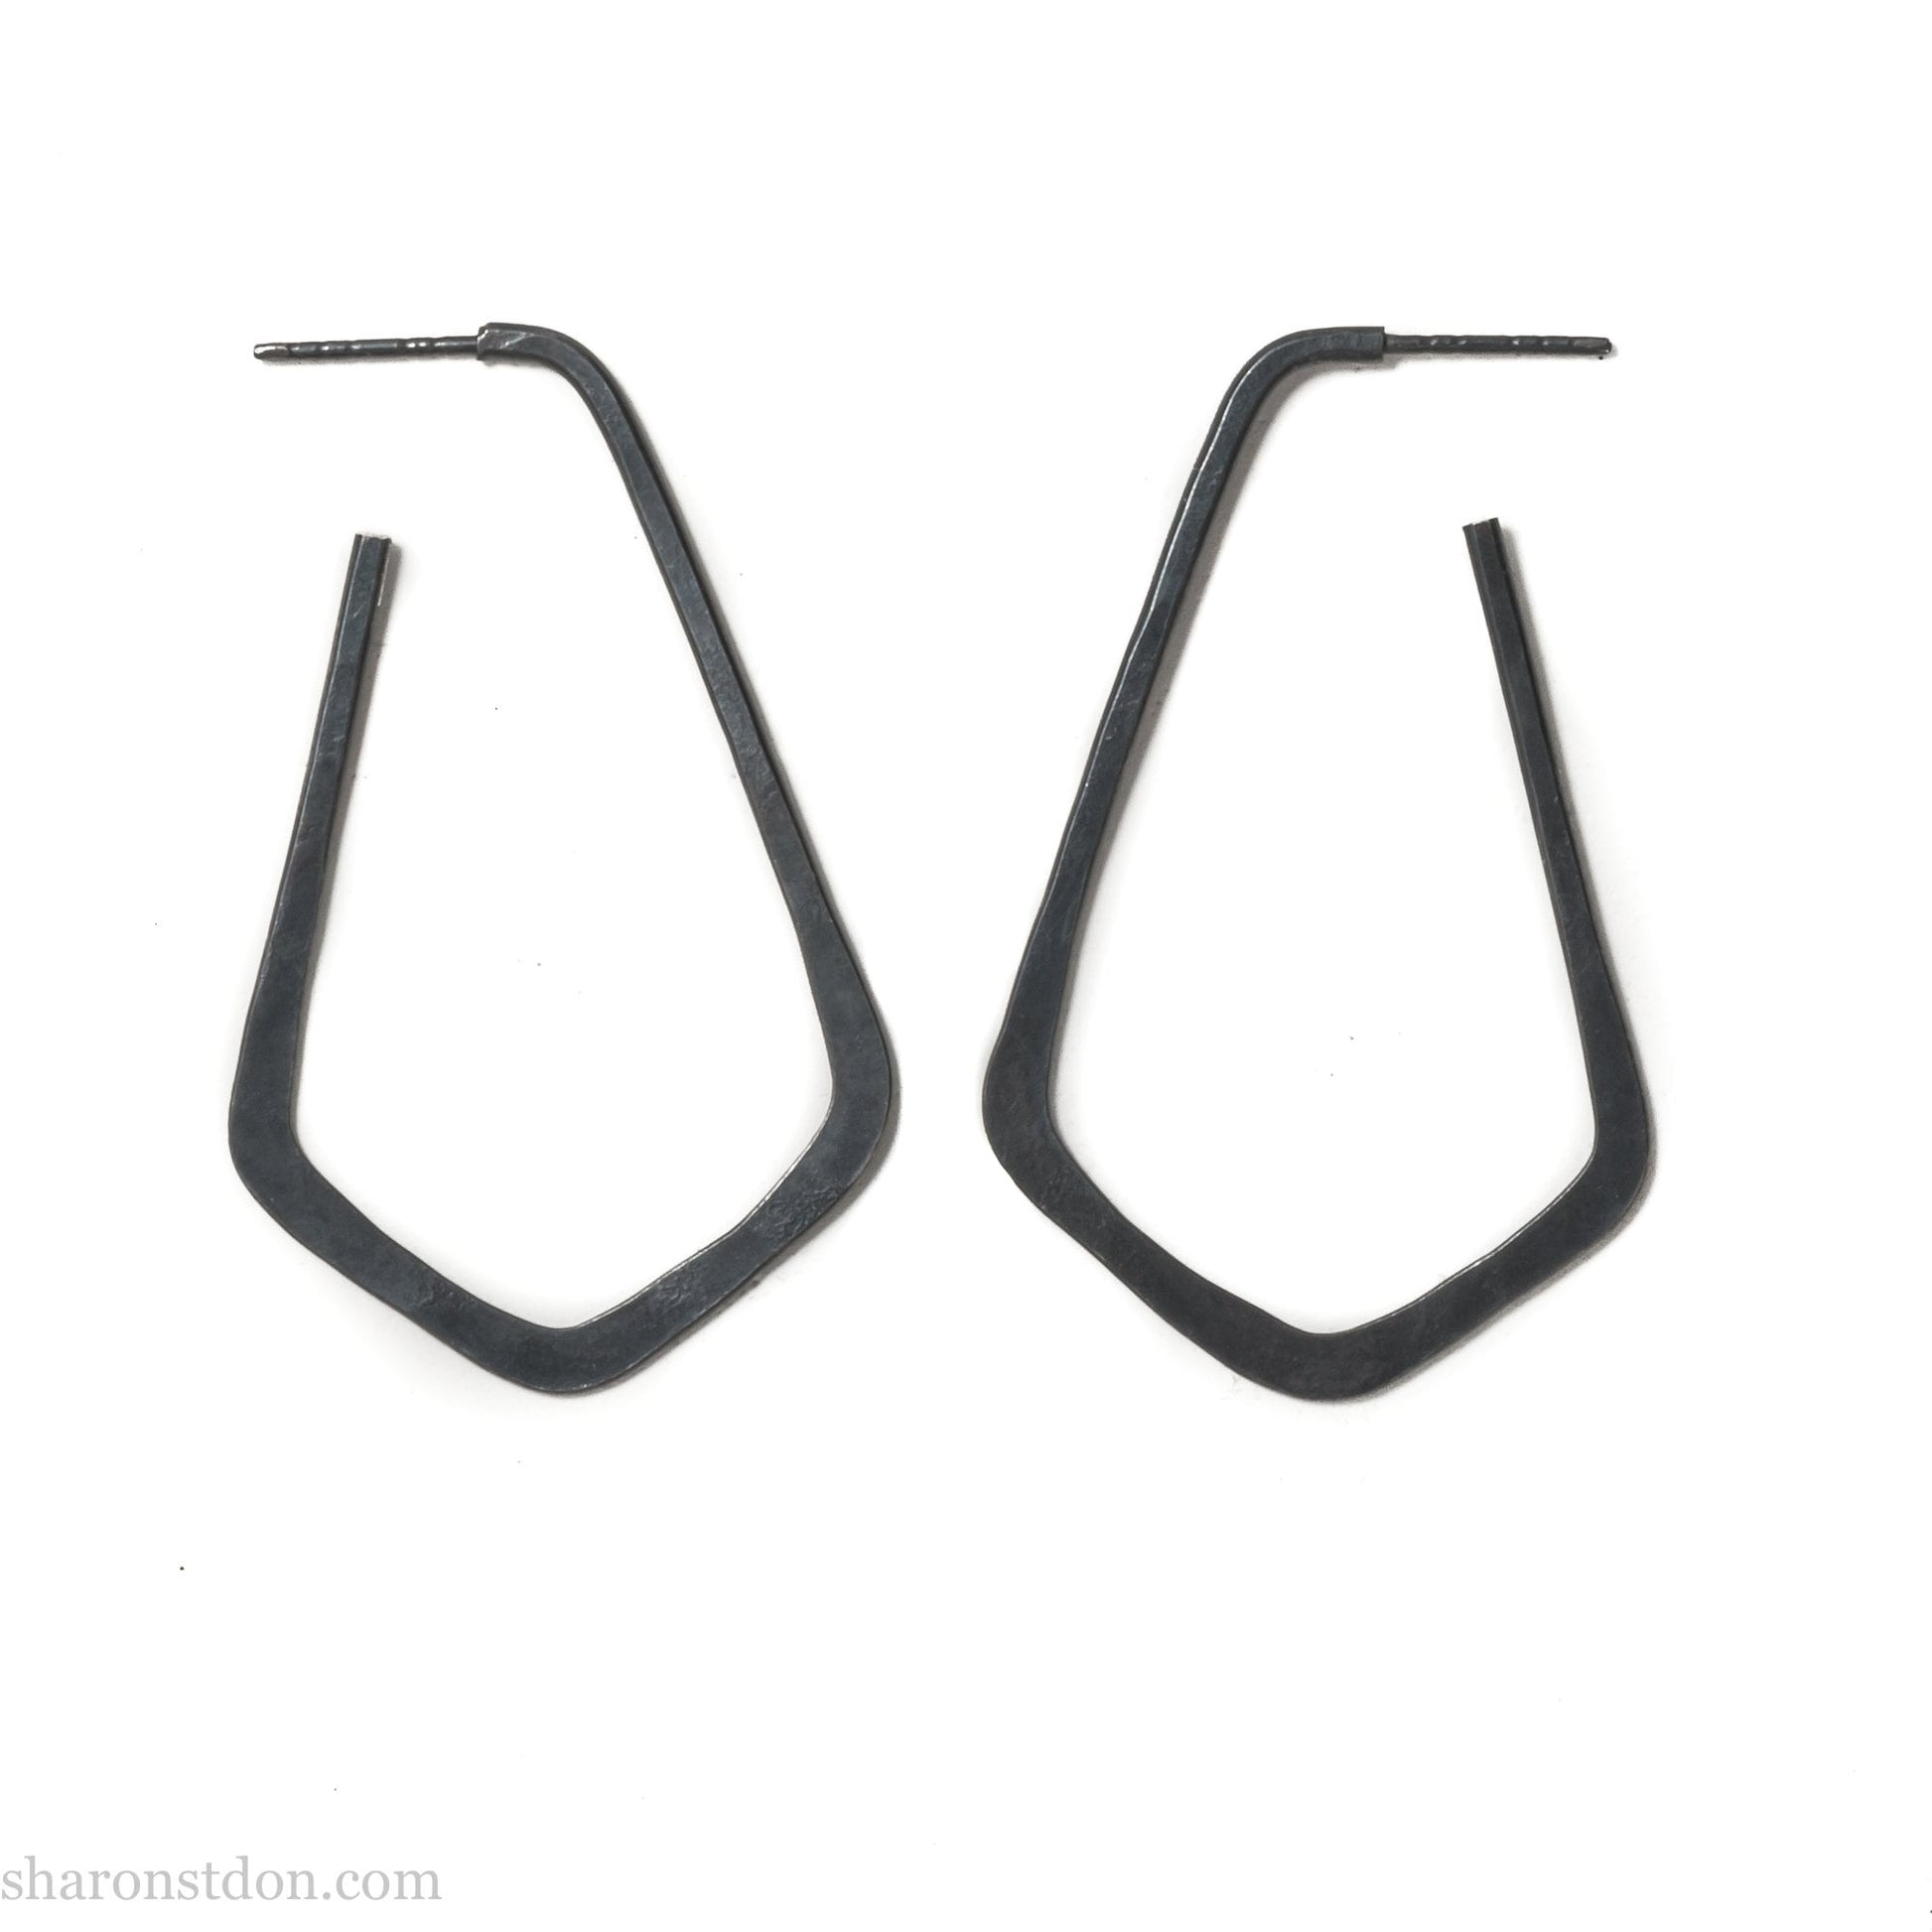 925 sterling silver hoop earrings handmade in North America by Sharon SaintDon. Long, angular, teardrop shape with three points at bottom, oxidized black with hammered texture. SIZE: 5cm high x 32mm wide